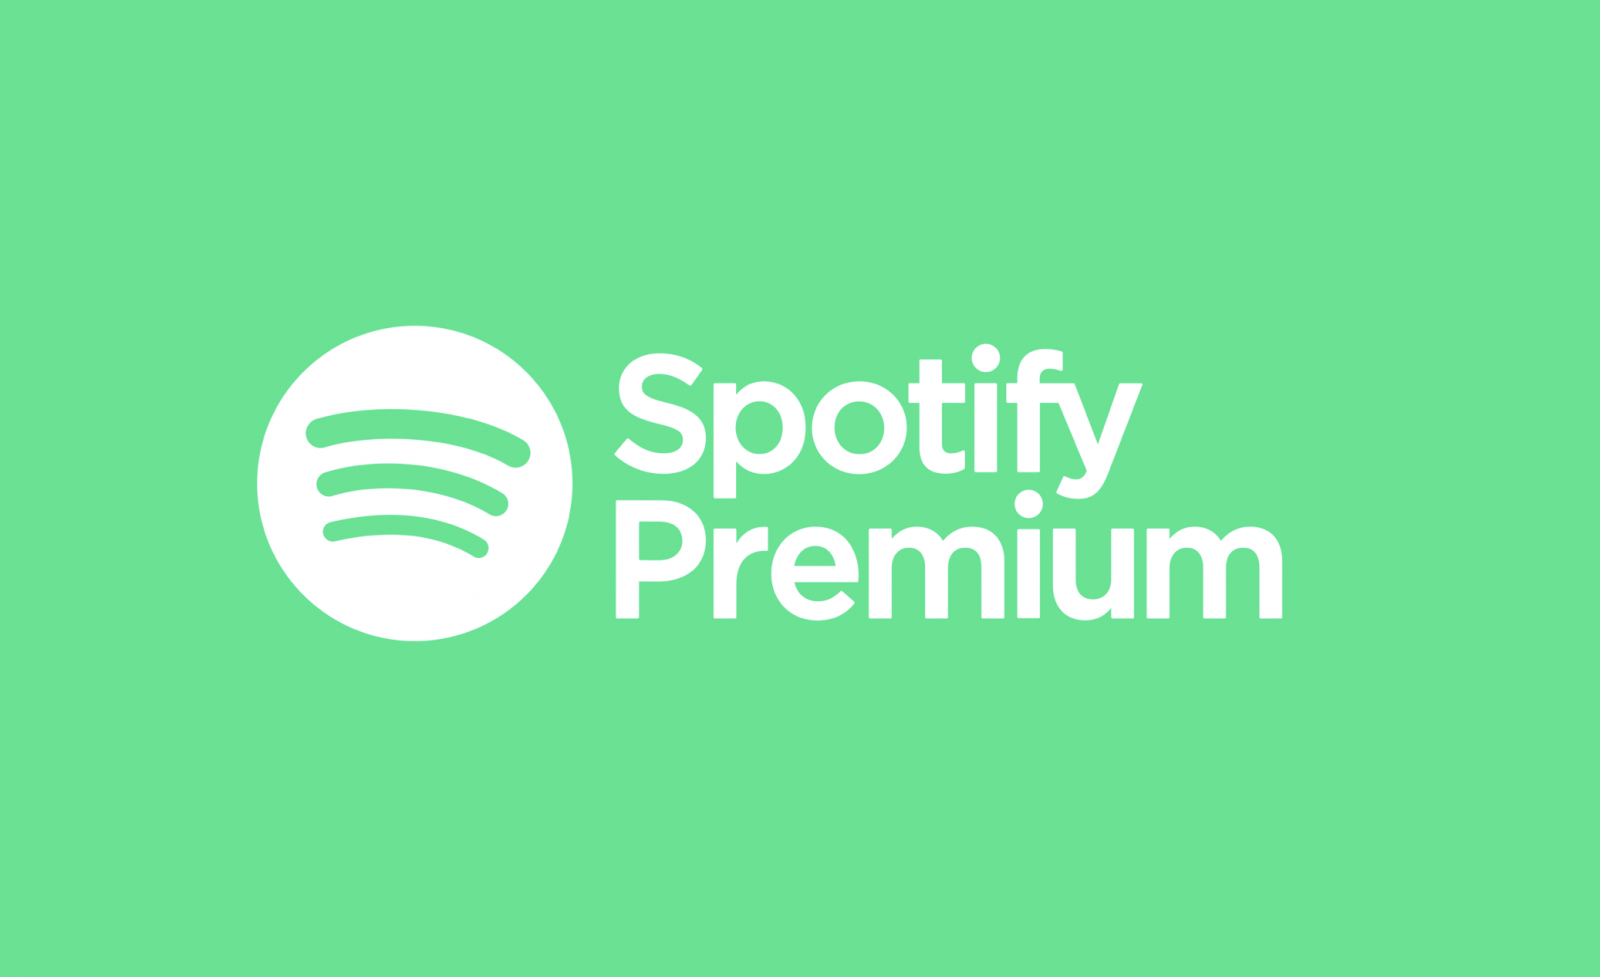 how to cancel spotify premium on iphone